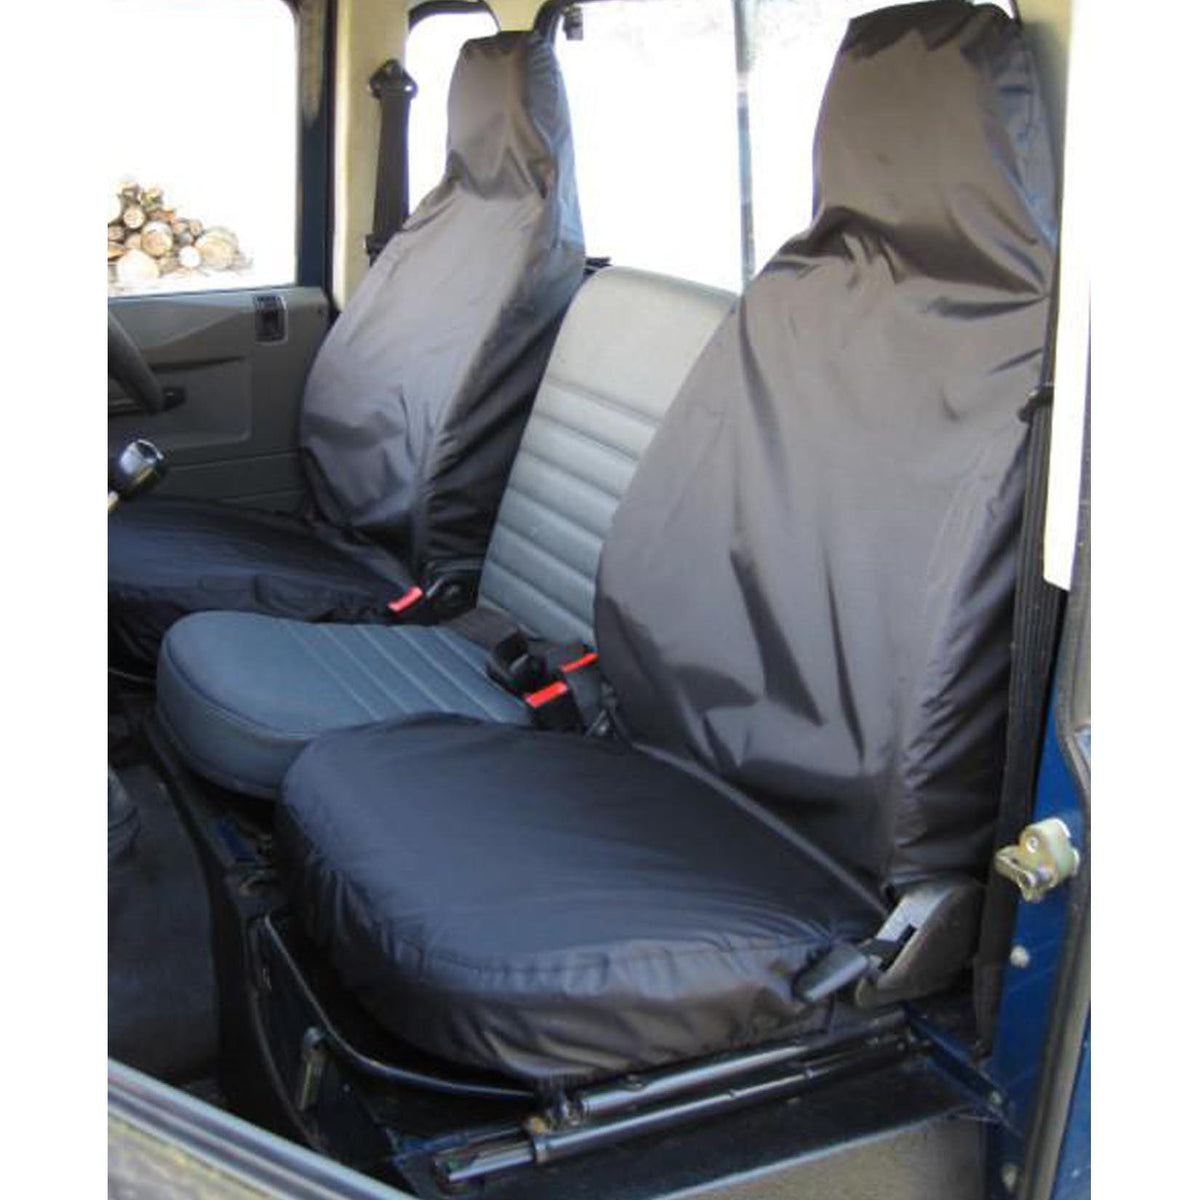 LAND ROVER DEFENDER 90 / 110 - 1983-2007 DRIVER AND SINGLE FRONT PASSENGER SEAT COVERS - BLACK - Storm Xccessories2